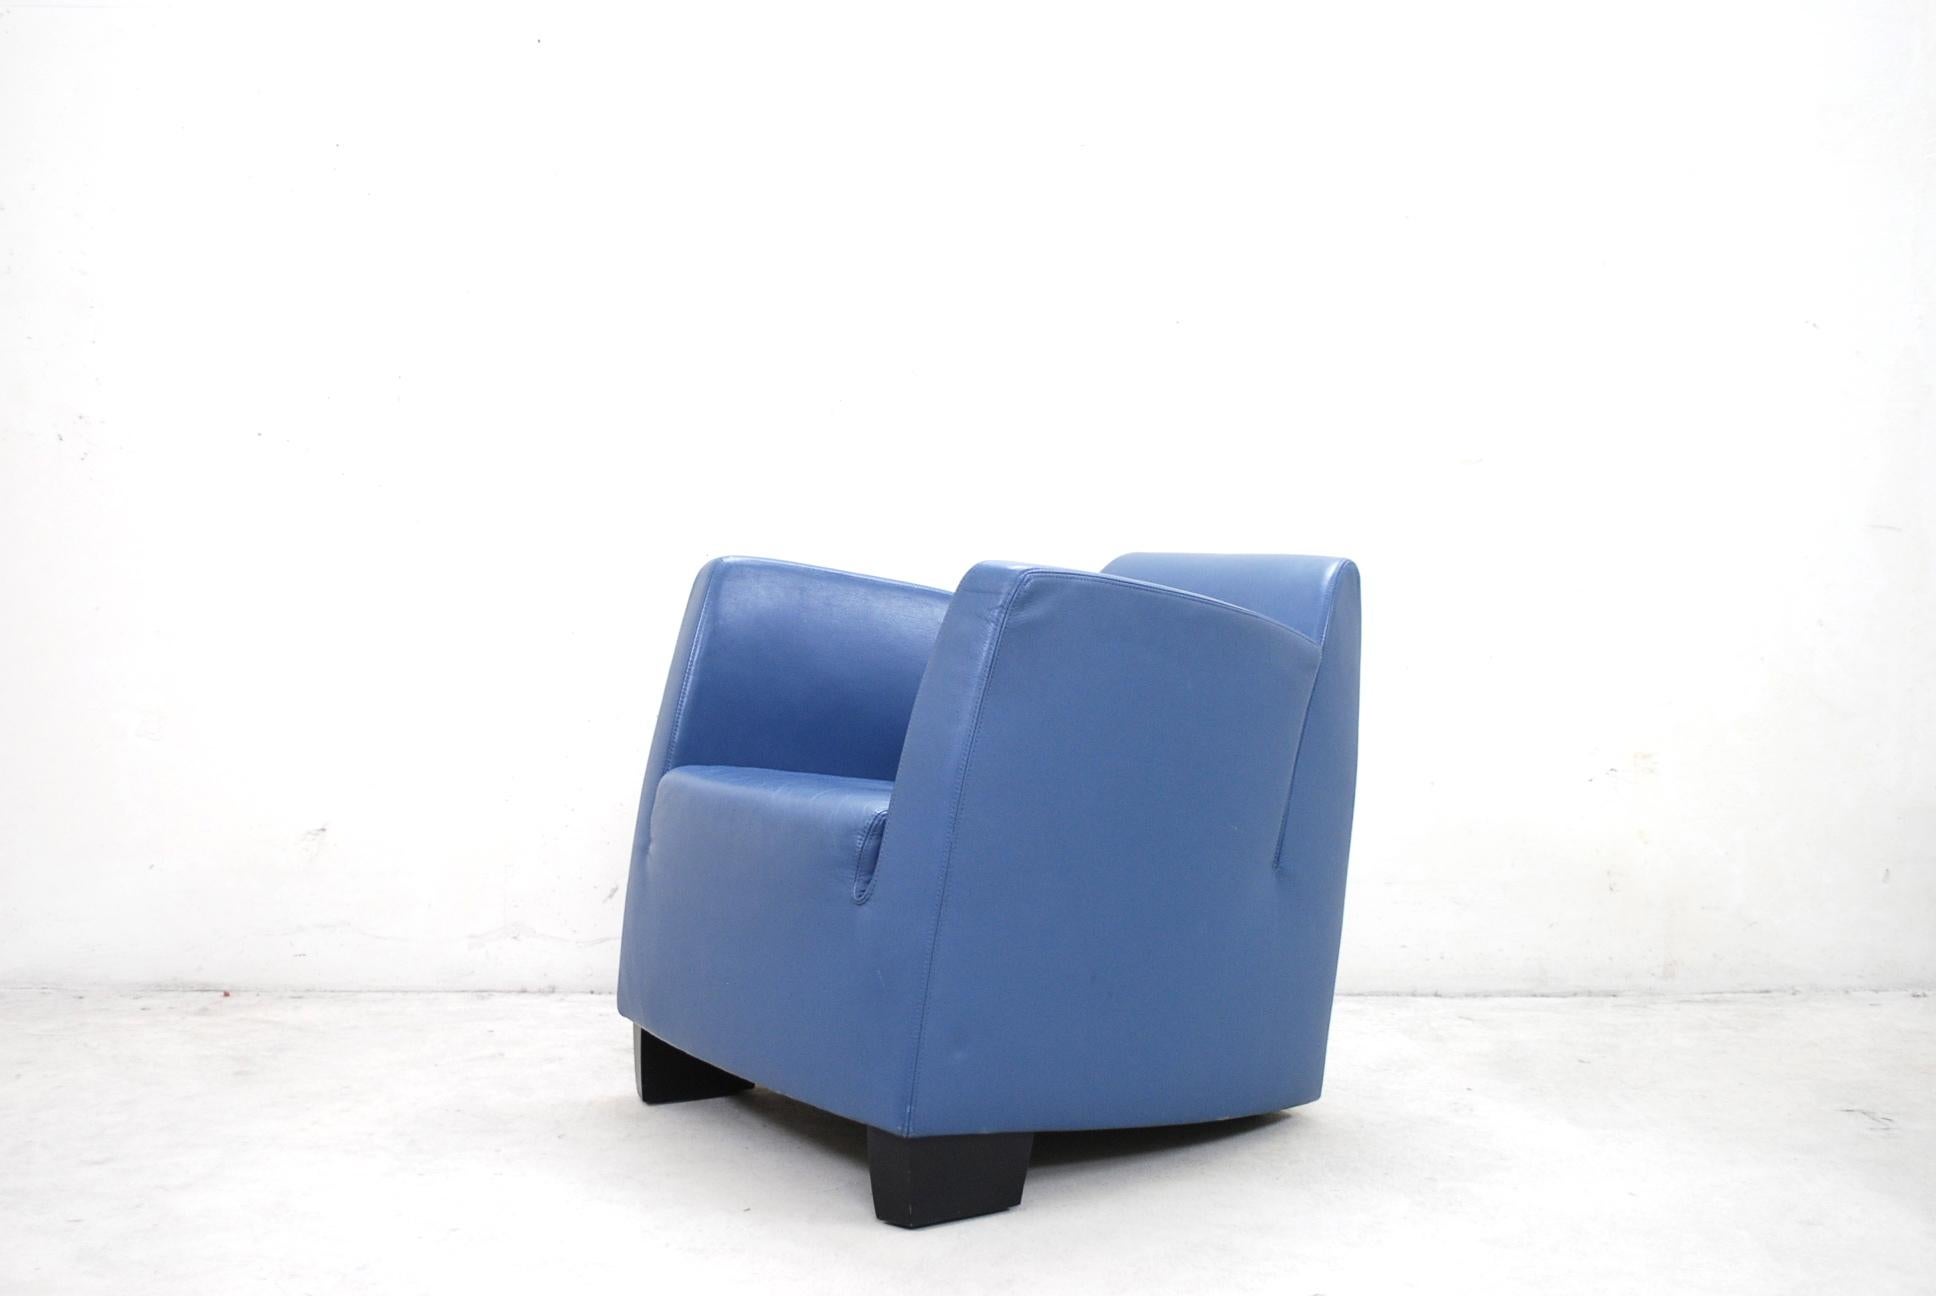 This small armchair Sena DS 2620 was designed by Kurt Erni 1995 for the Swiss manufacture team by Wellis.
De Sede was buying Team by Wellis in the year 2012 and this armchair was produced since then 2012 by De Sede.
This chair was the first